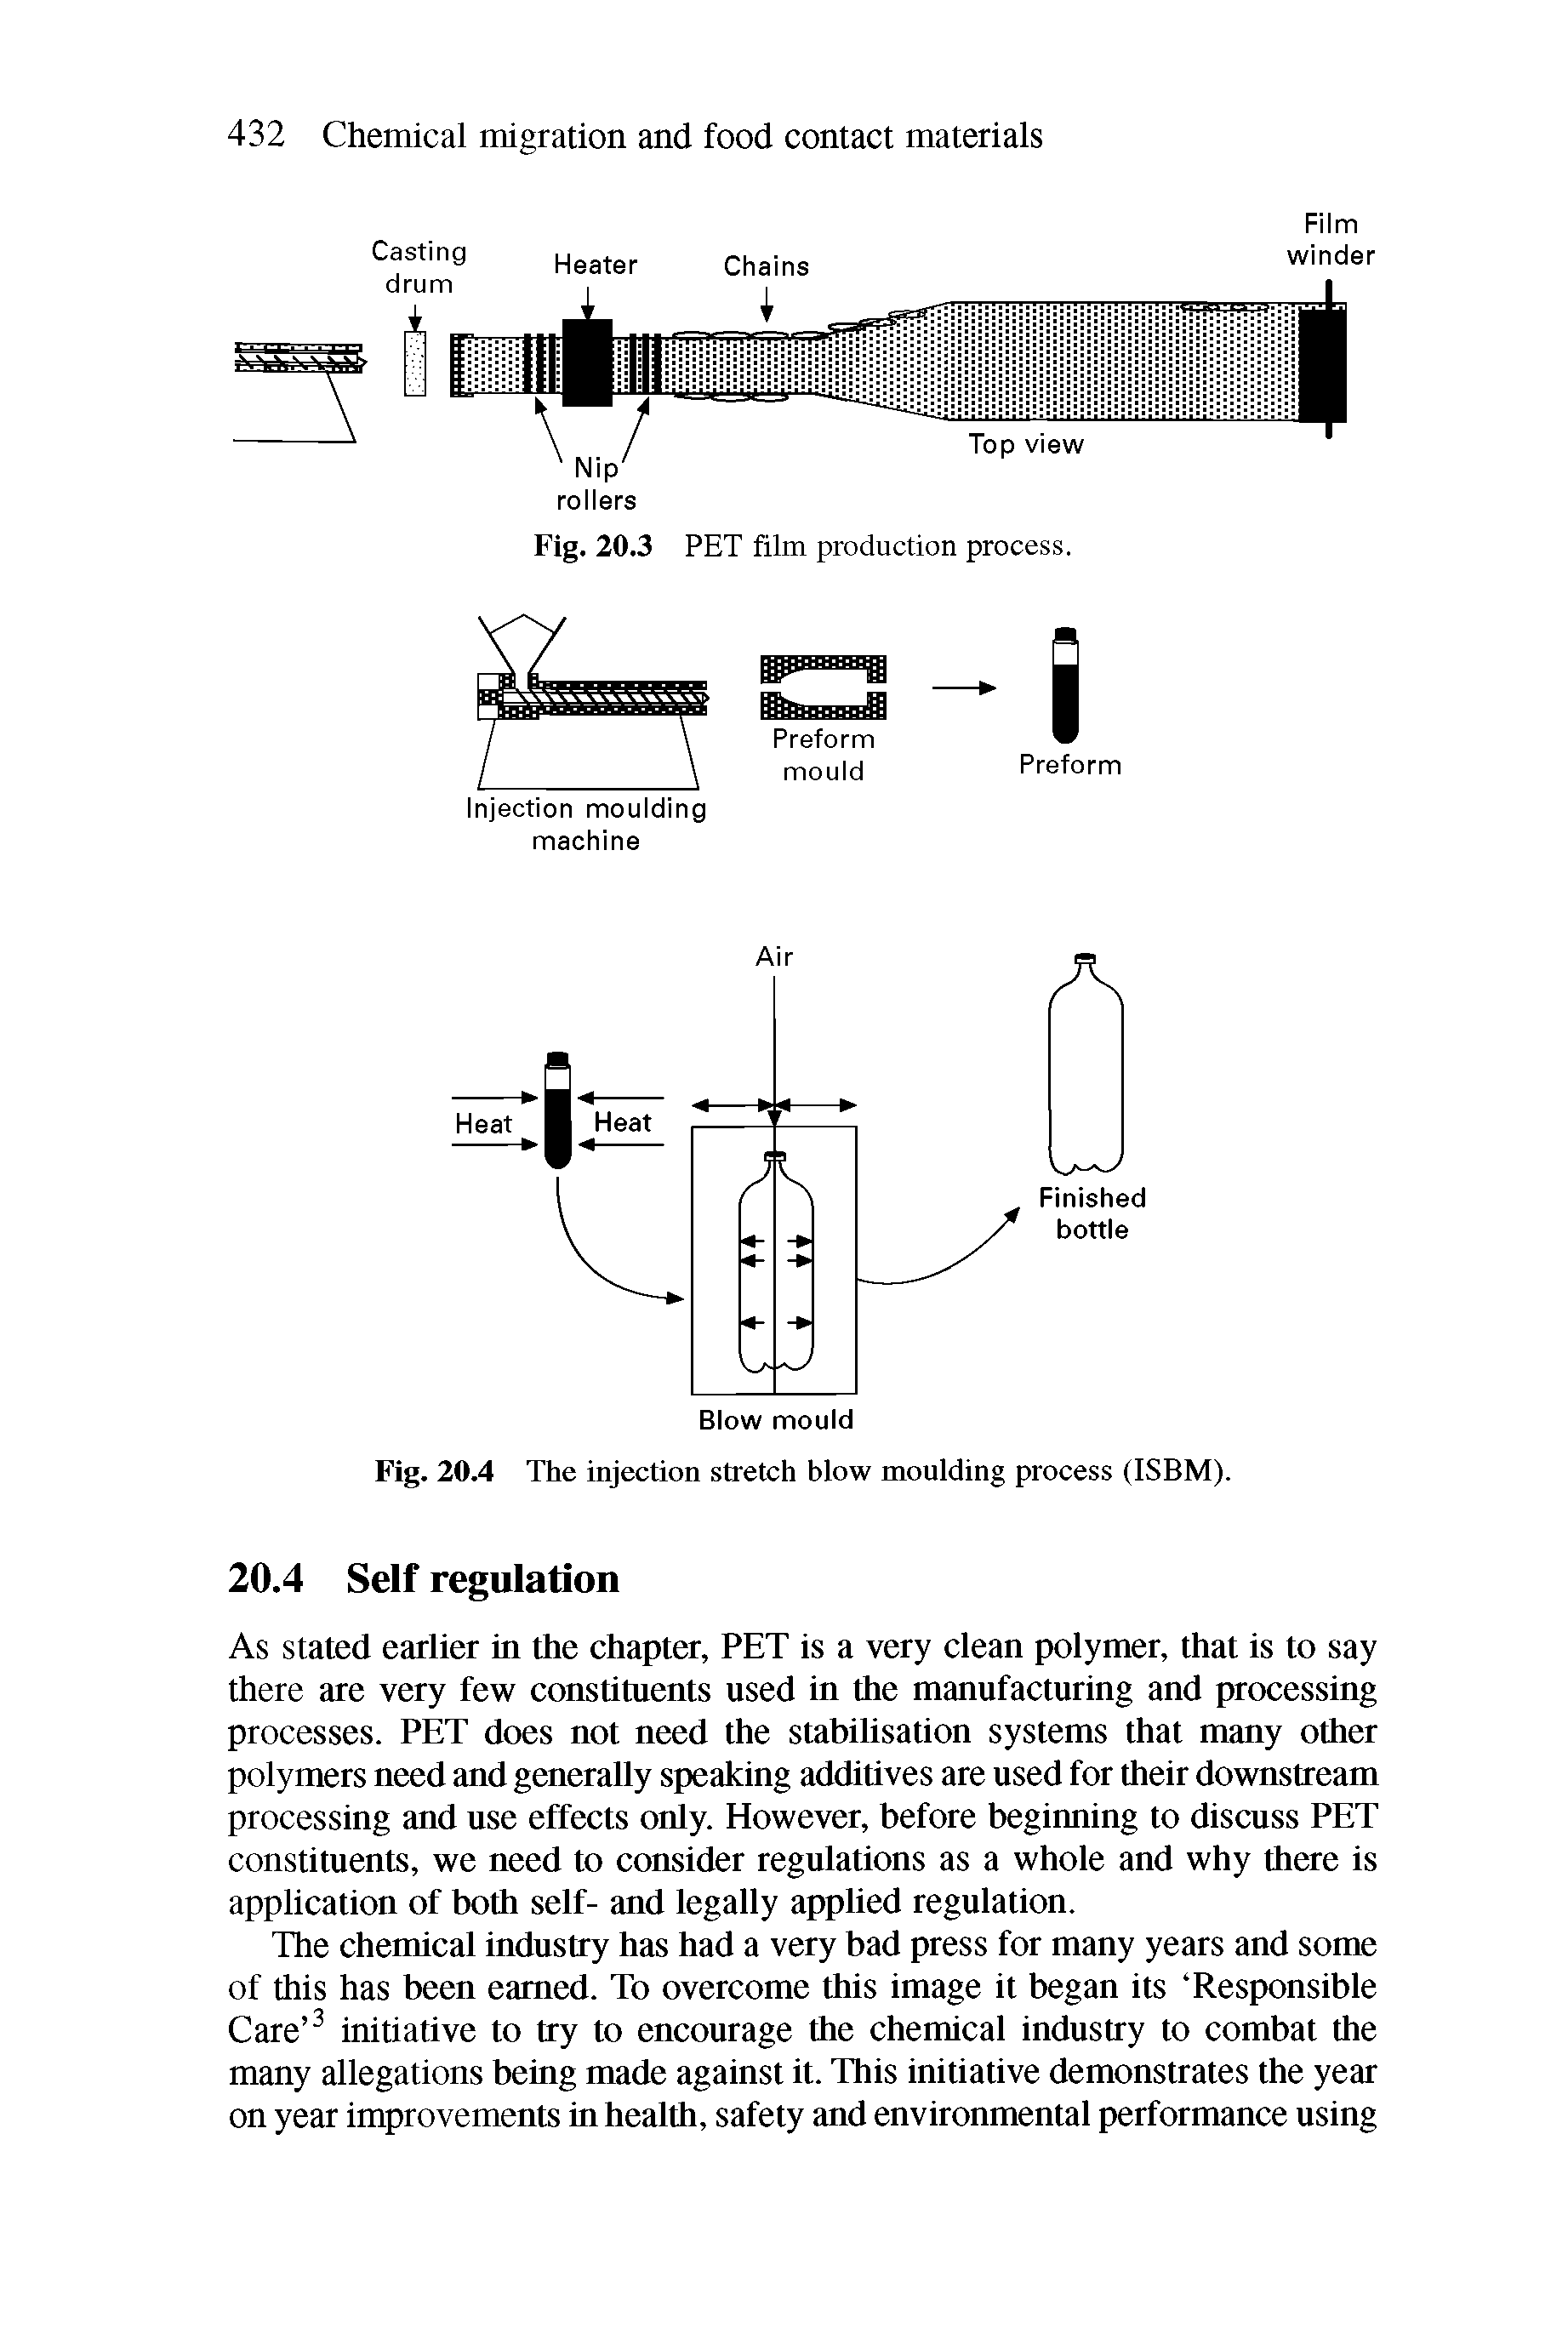 Fig. 20.4 The injection stretch blow moulding process (ISBM).